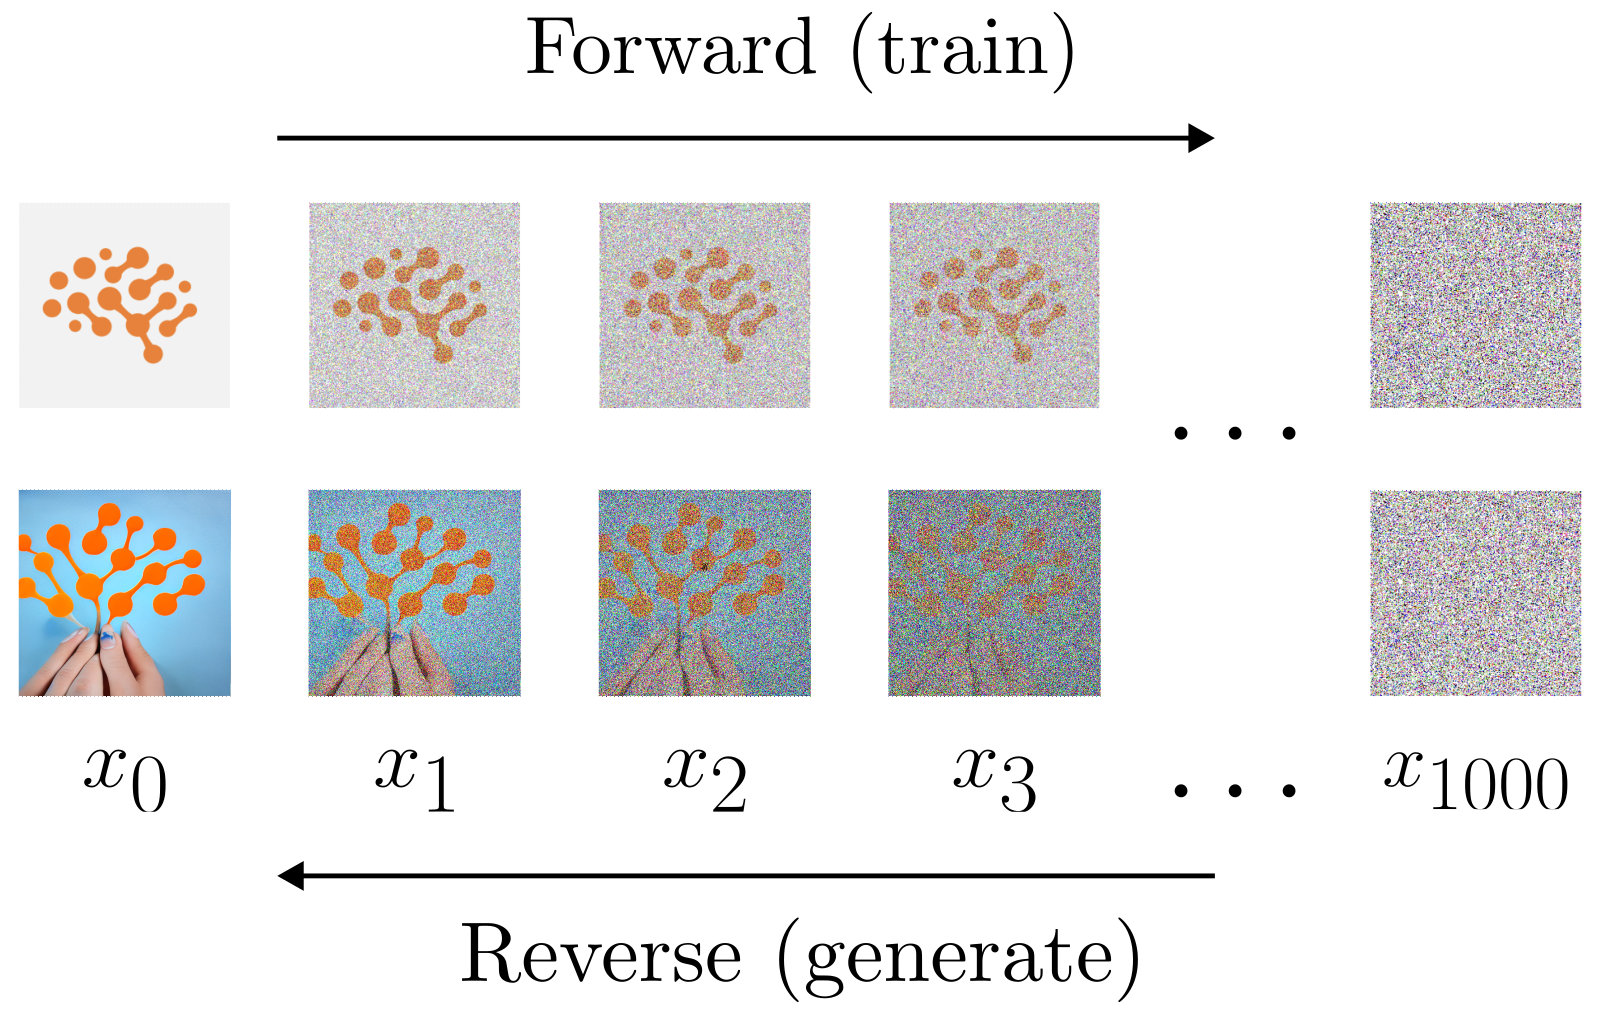 A visualization of the forward and reverse processes described above